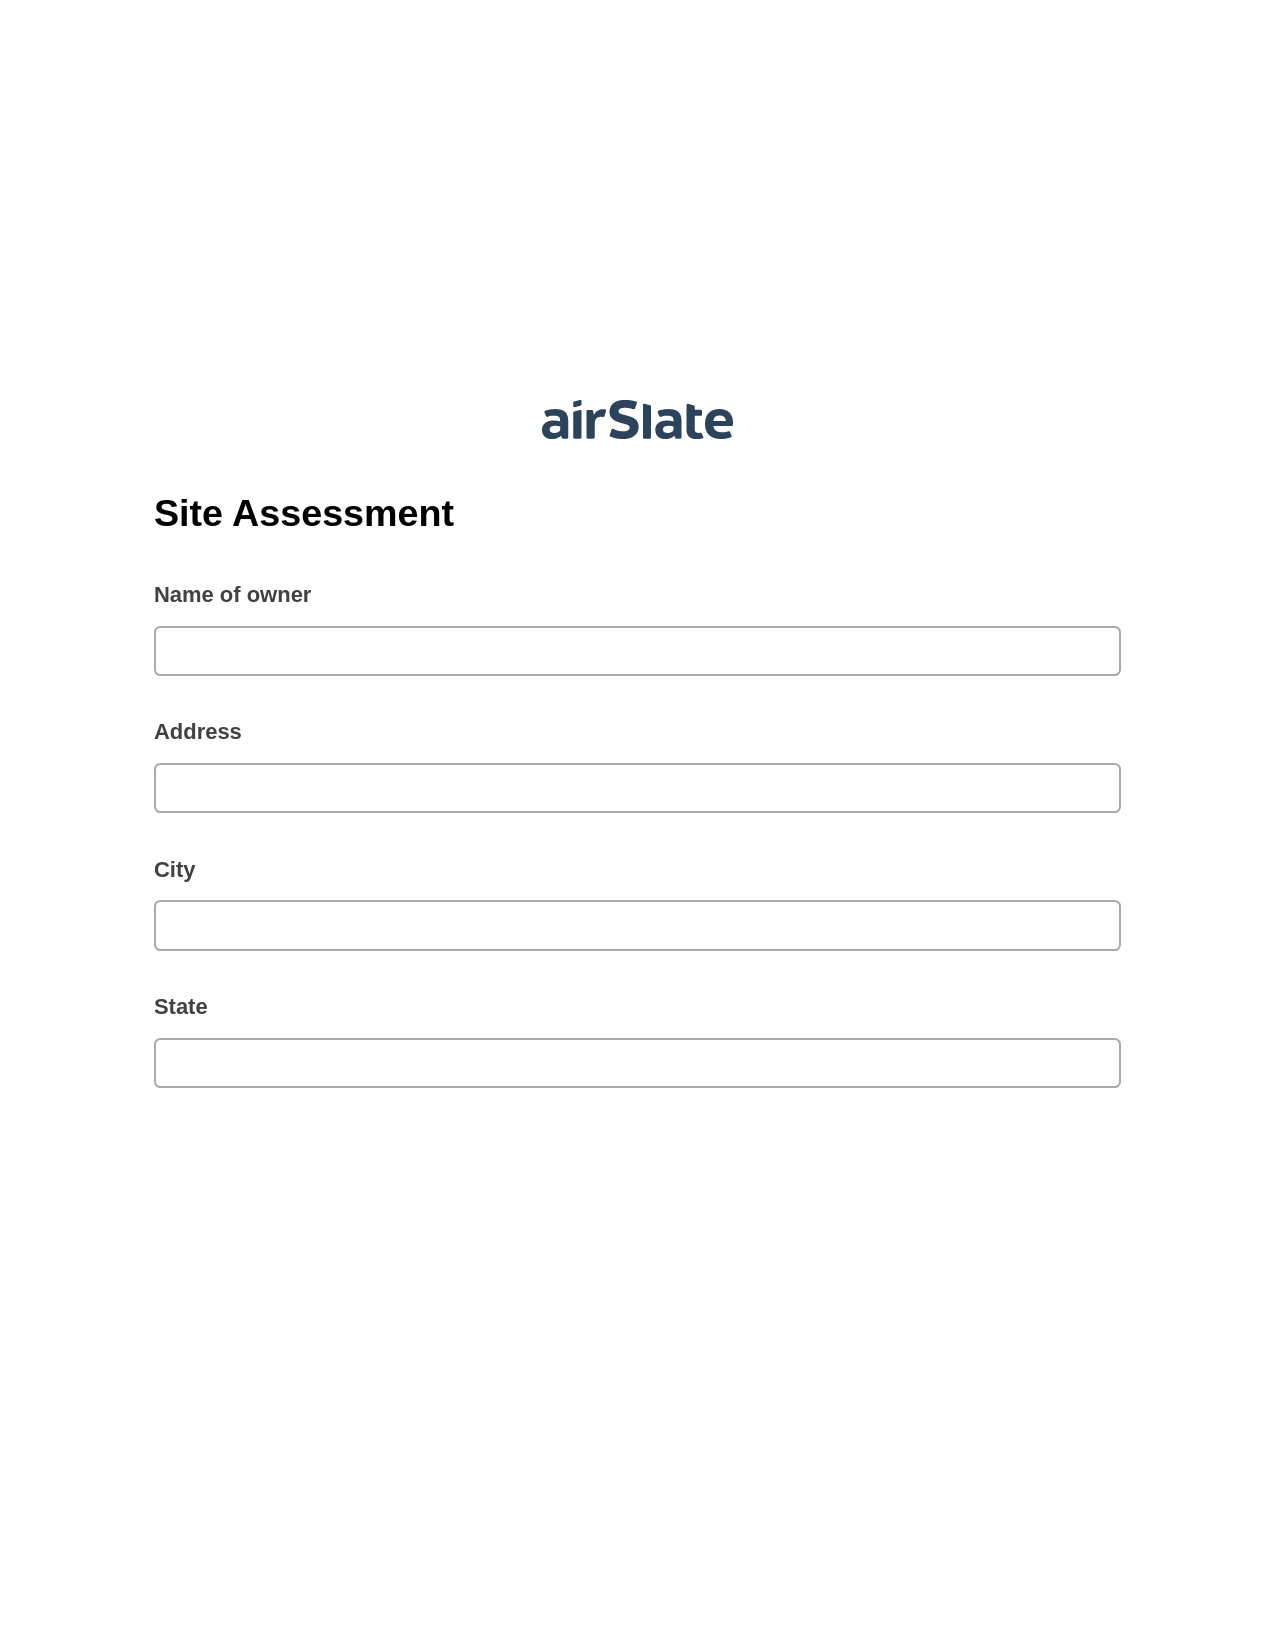 Site Assessment Pre-fill from Salesforce Records with SOQL Bot, Roles Reminder Bot, Export to Excel 365 Bot